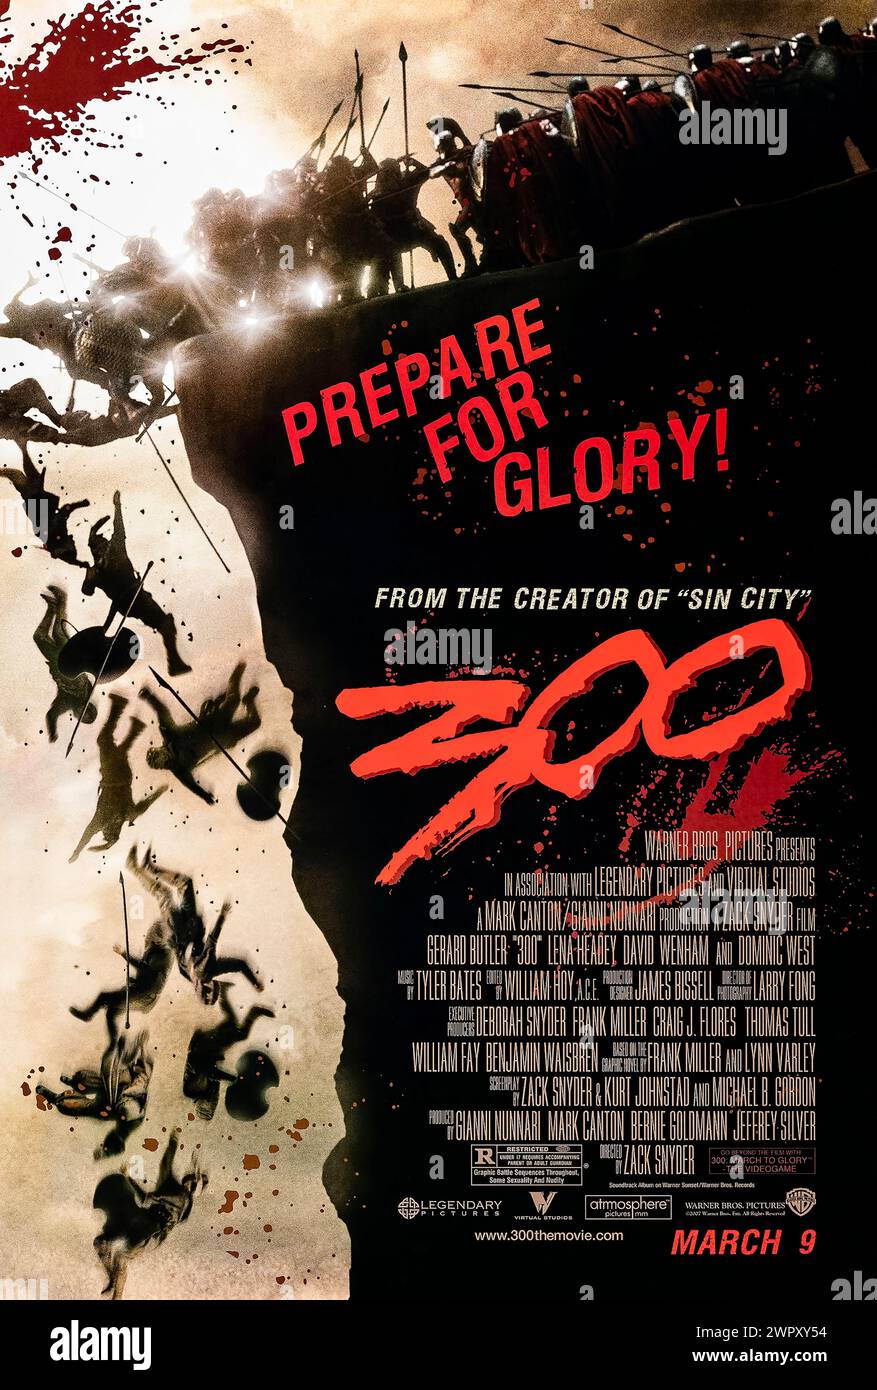 300 (2006) directed by Zack Snyder and starring Gerard Butler, Lena Headey and David Wenham. King Leonidas leads 300 Spartans into battle against Xerxes' invading army of more than 300,000 soldiers. Photograph of an original 2006 US one sheet poster. ***EDITORIAL USE ONLY*** Credit: BFA / Warner Bros Stock Photo